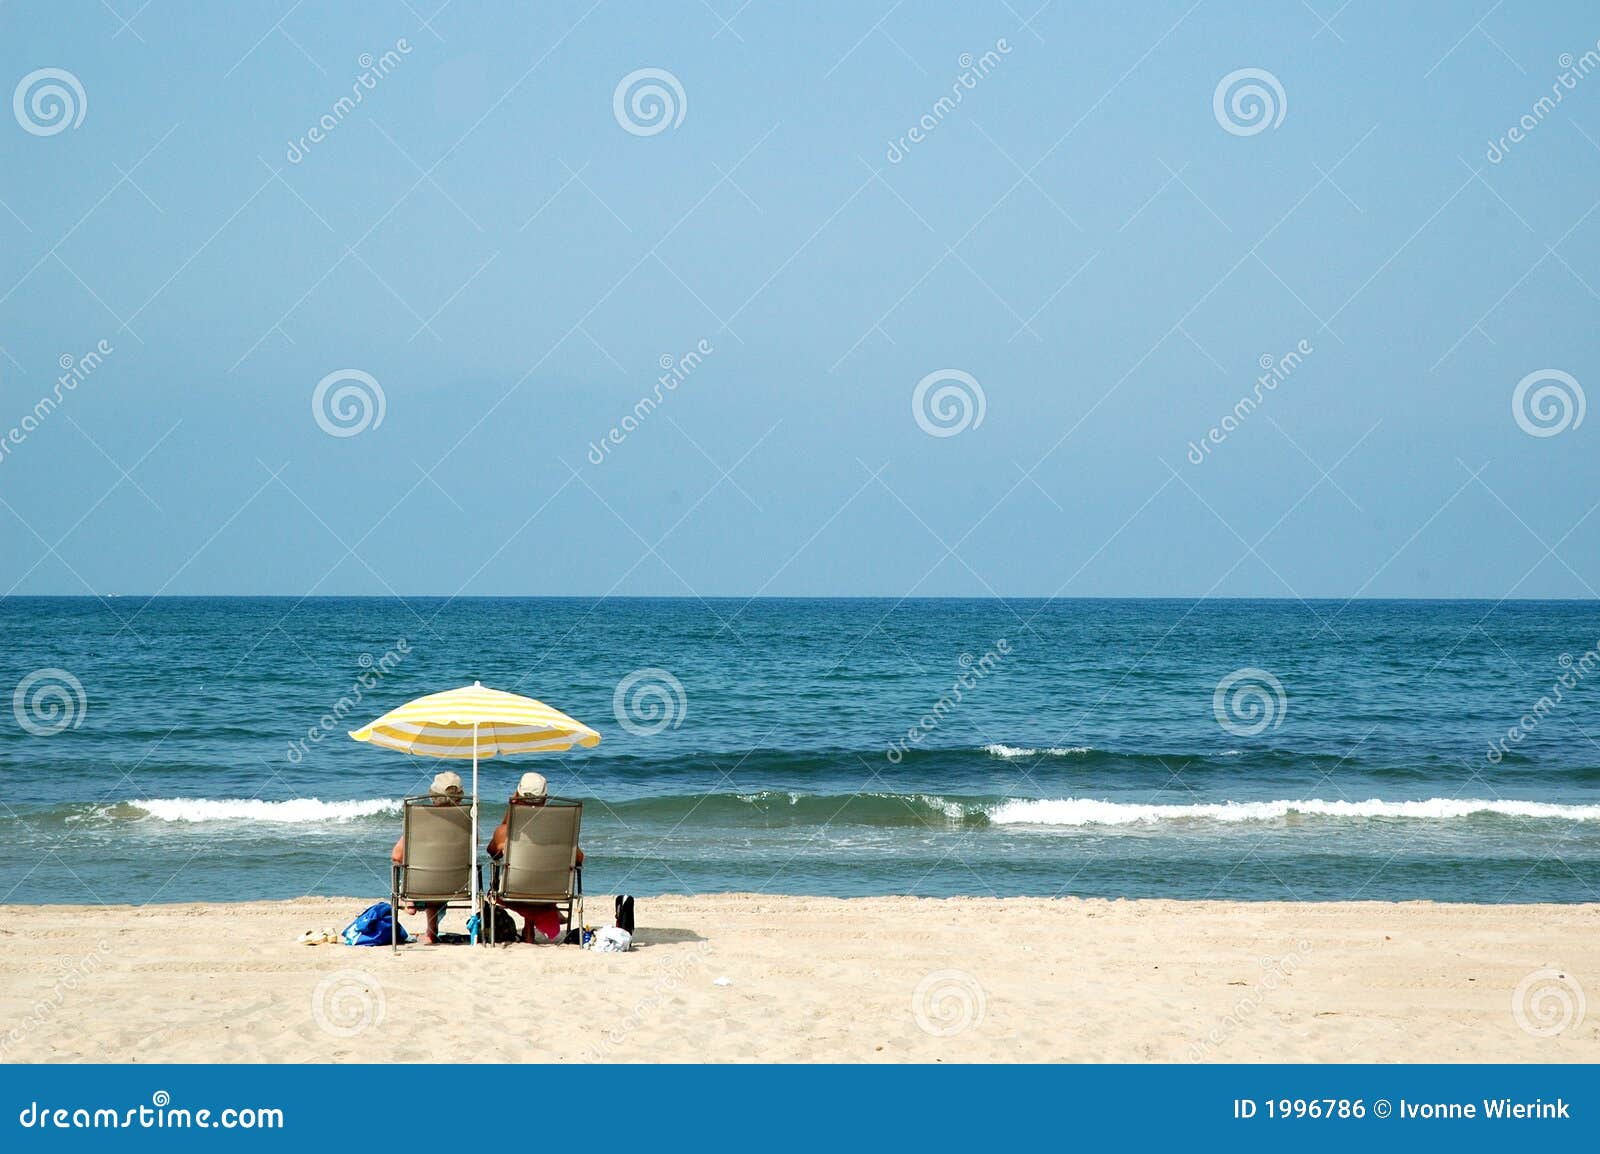 two retired people at the beach